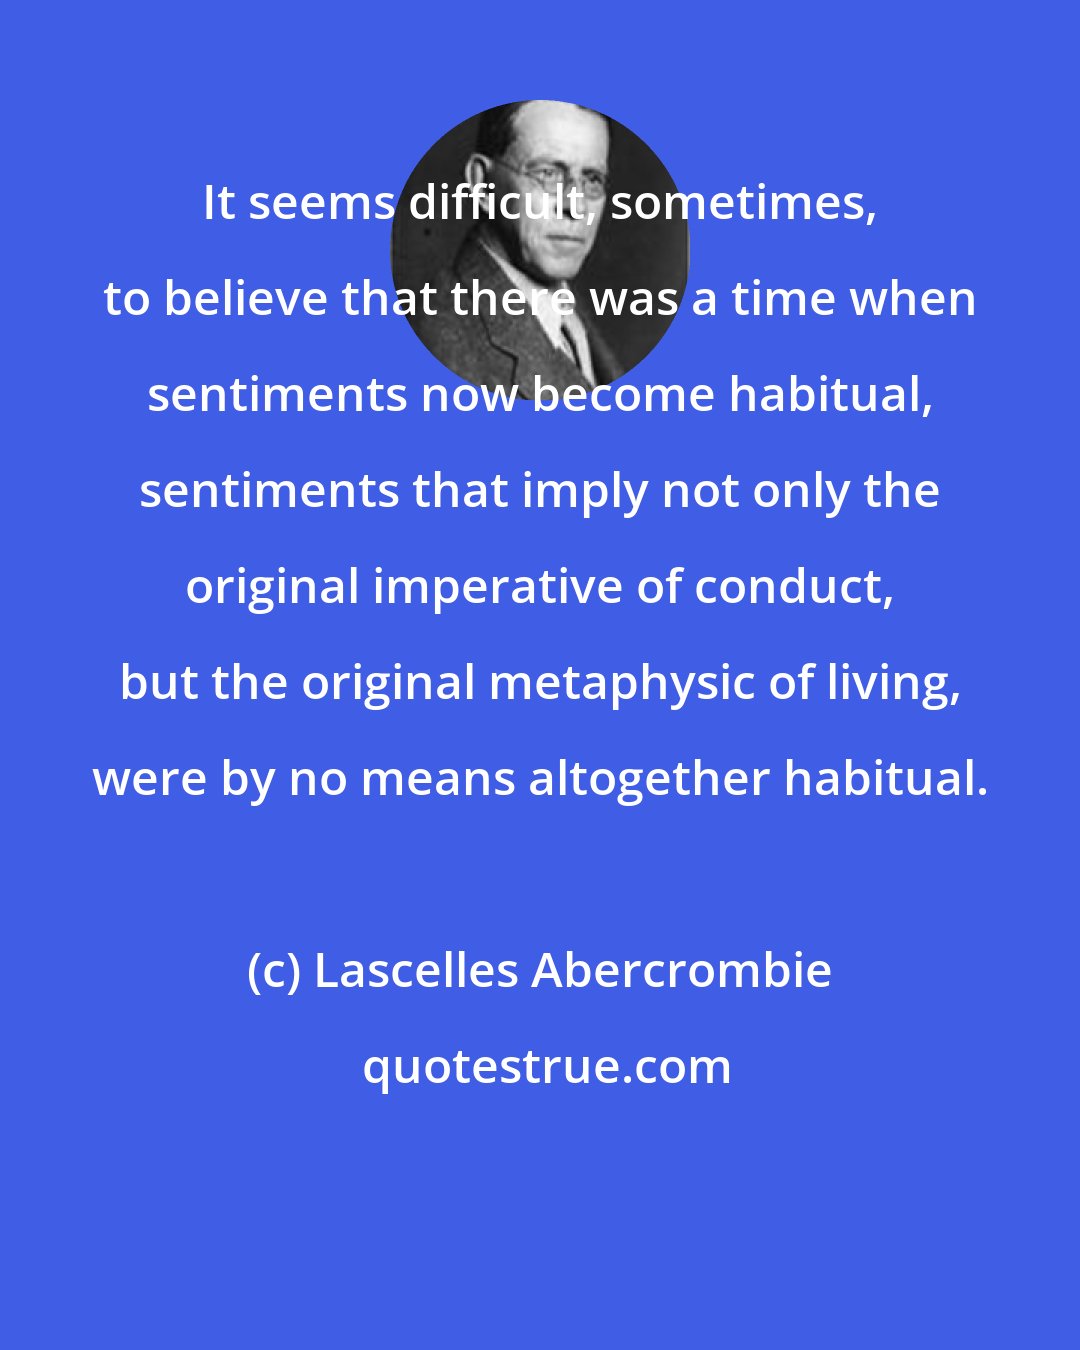 Lascelles Abercrombie: It seems difficult, sometimes, to believe that there was a time when sentiments now become habitual, sentiments that imply not only the original imperative of conduct, but the original metaphysic of living, were by no means altogether habitual.